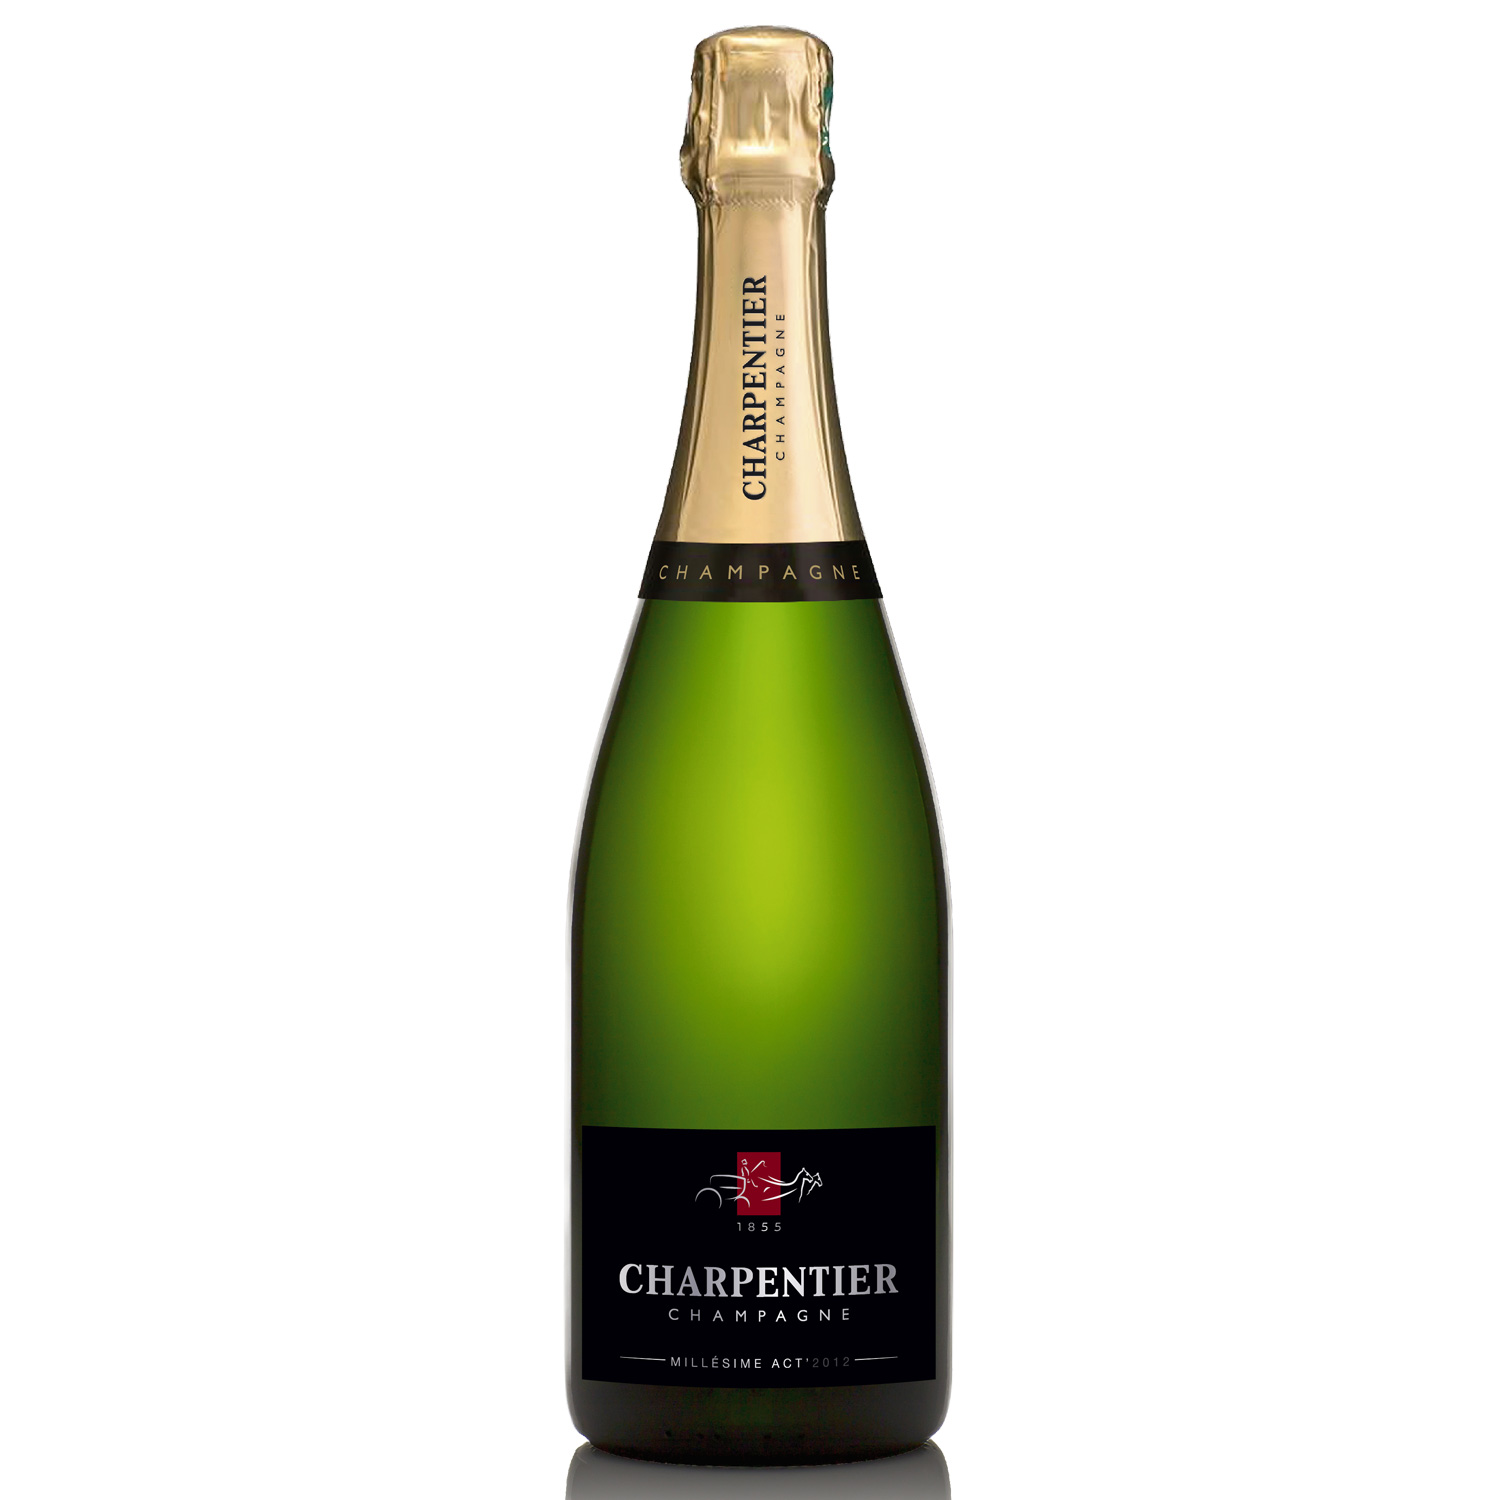 Champagne Charpentier: Millésime Act'2015